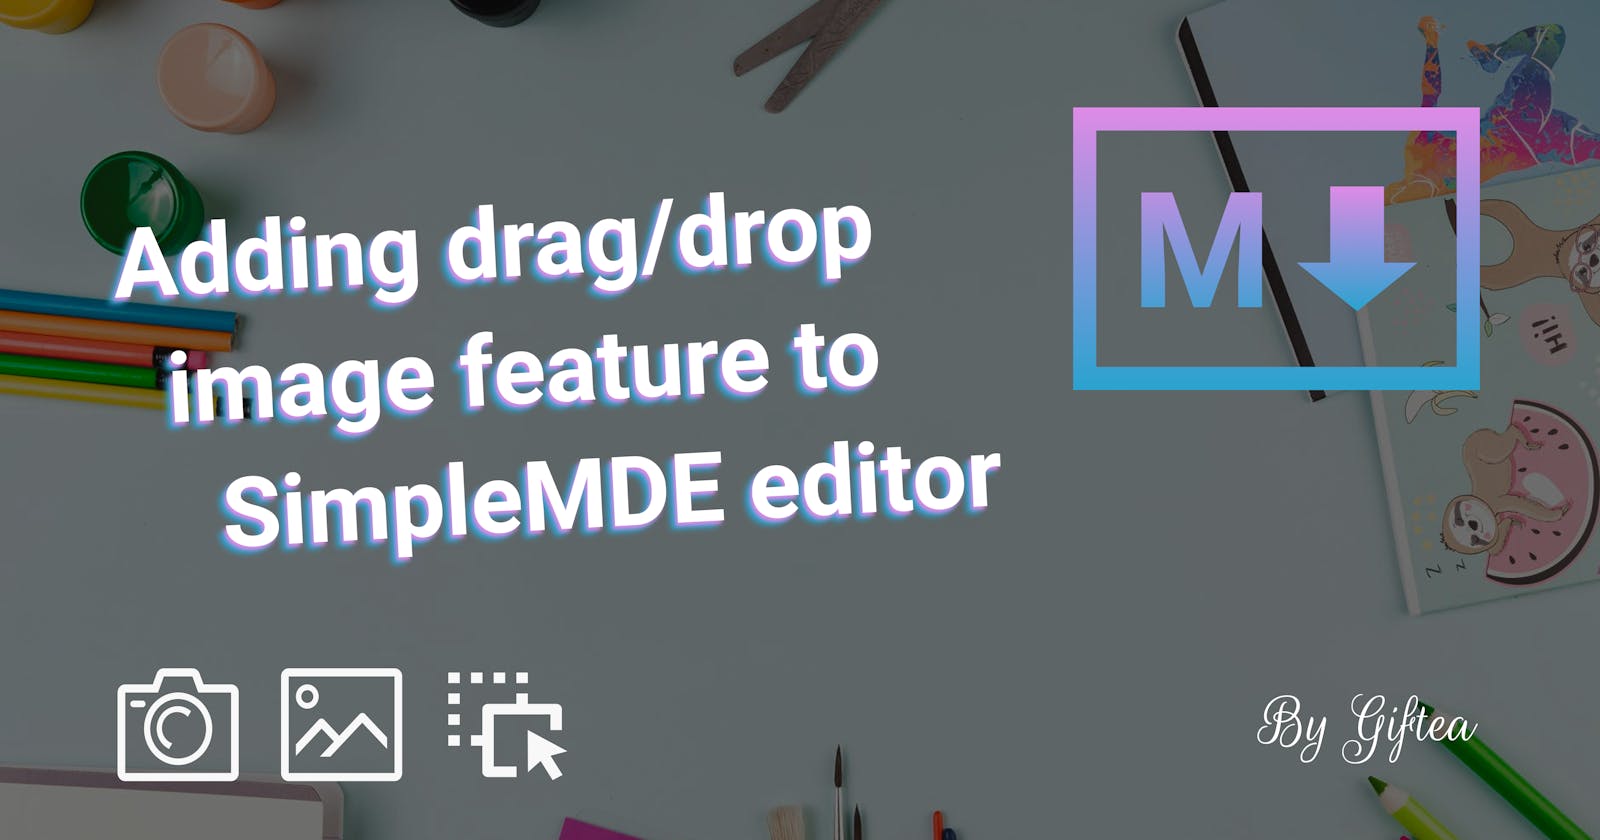 Configure the React SimpleMDE Markdown Editor to allow for image upload by drag-and-drop and copy-and-paste